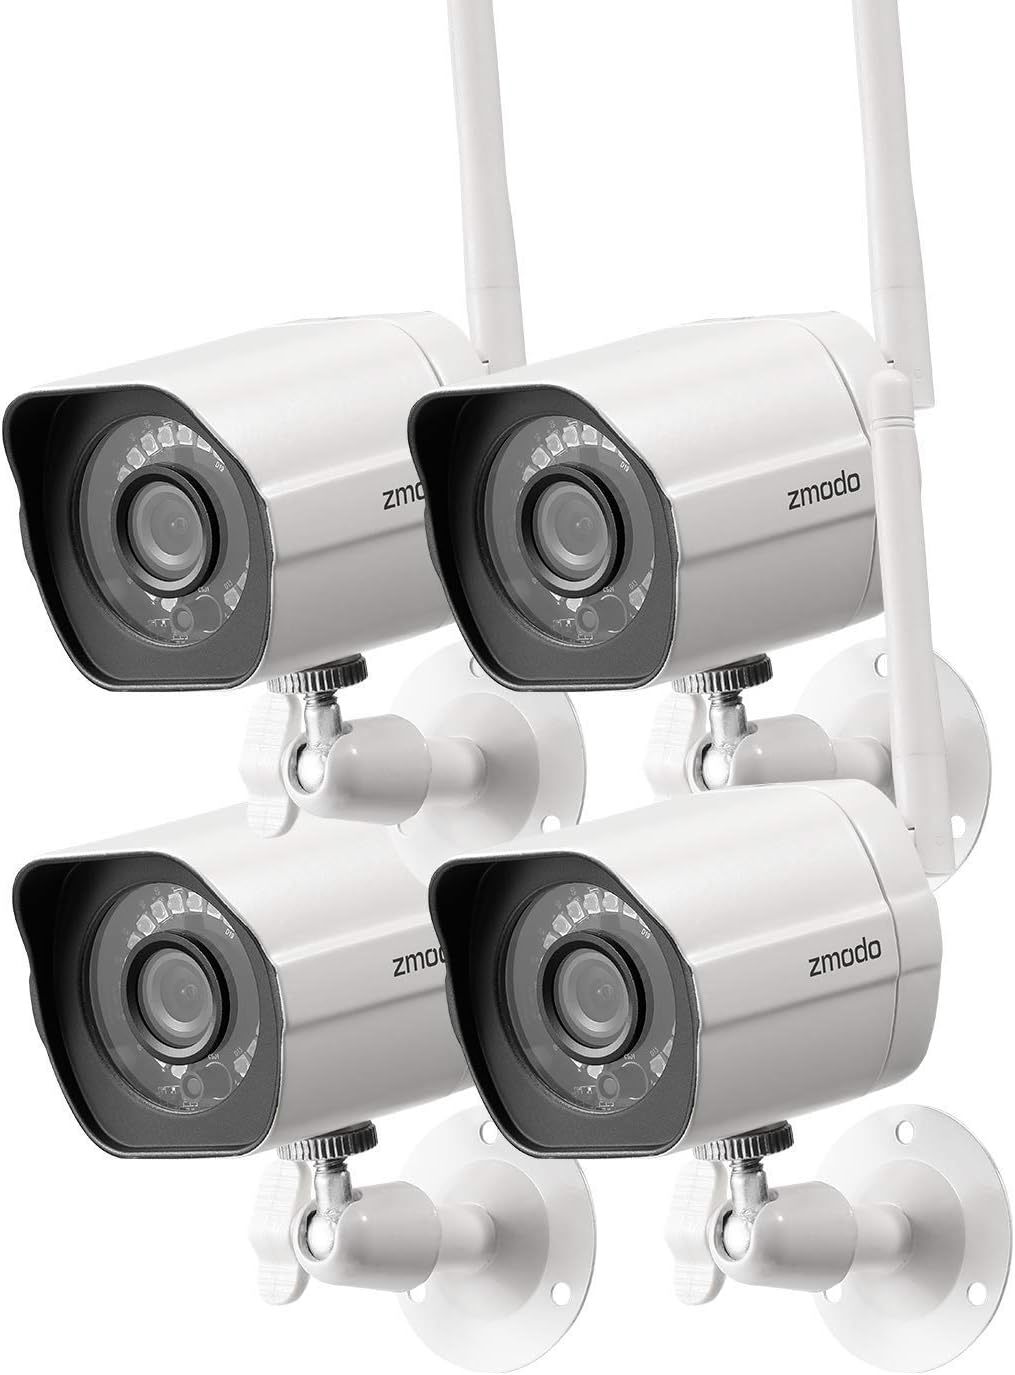 Primary image for Zmodo 1080P Full Hd Outdoor Wireless Security Camera System, 4 Pack Smart Home